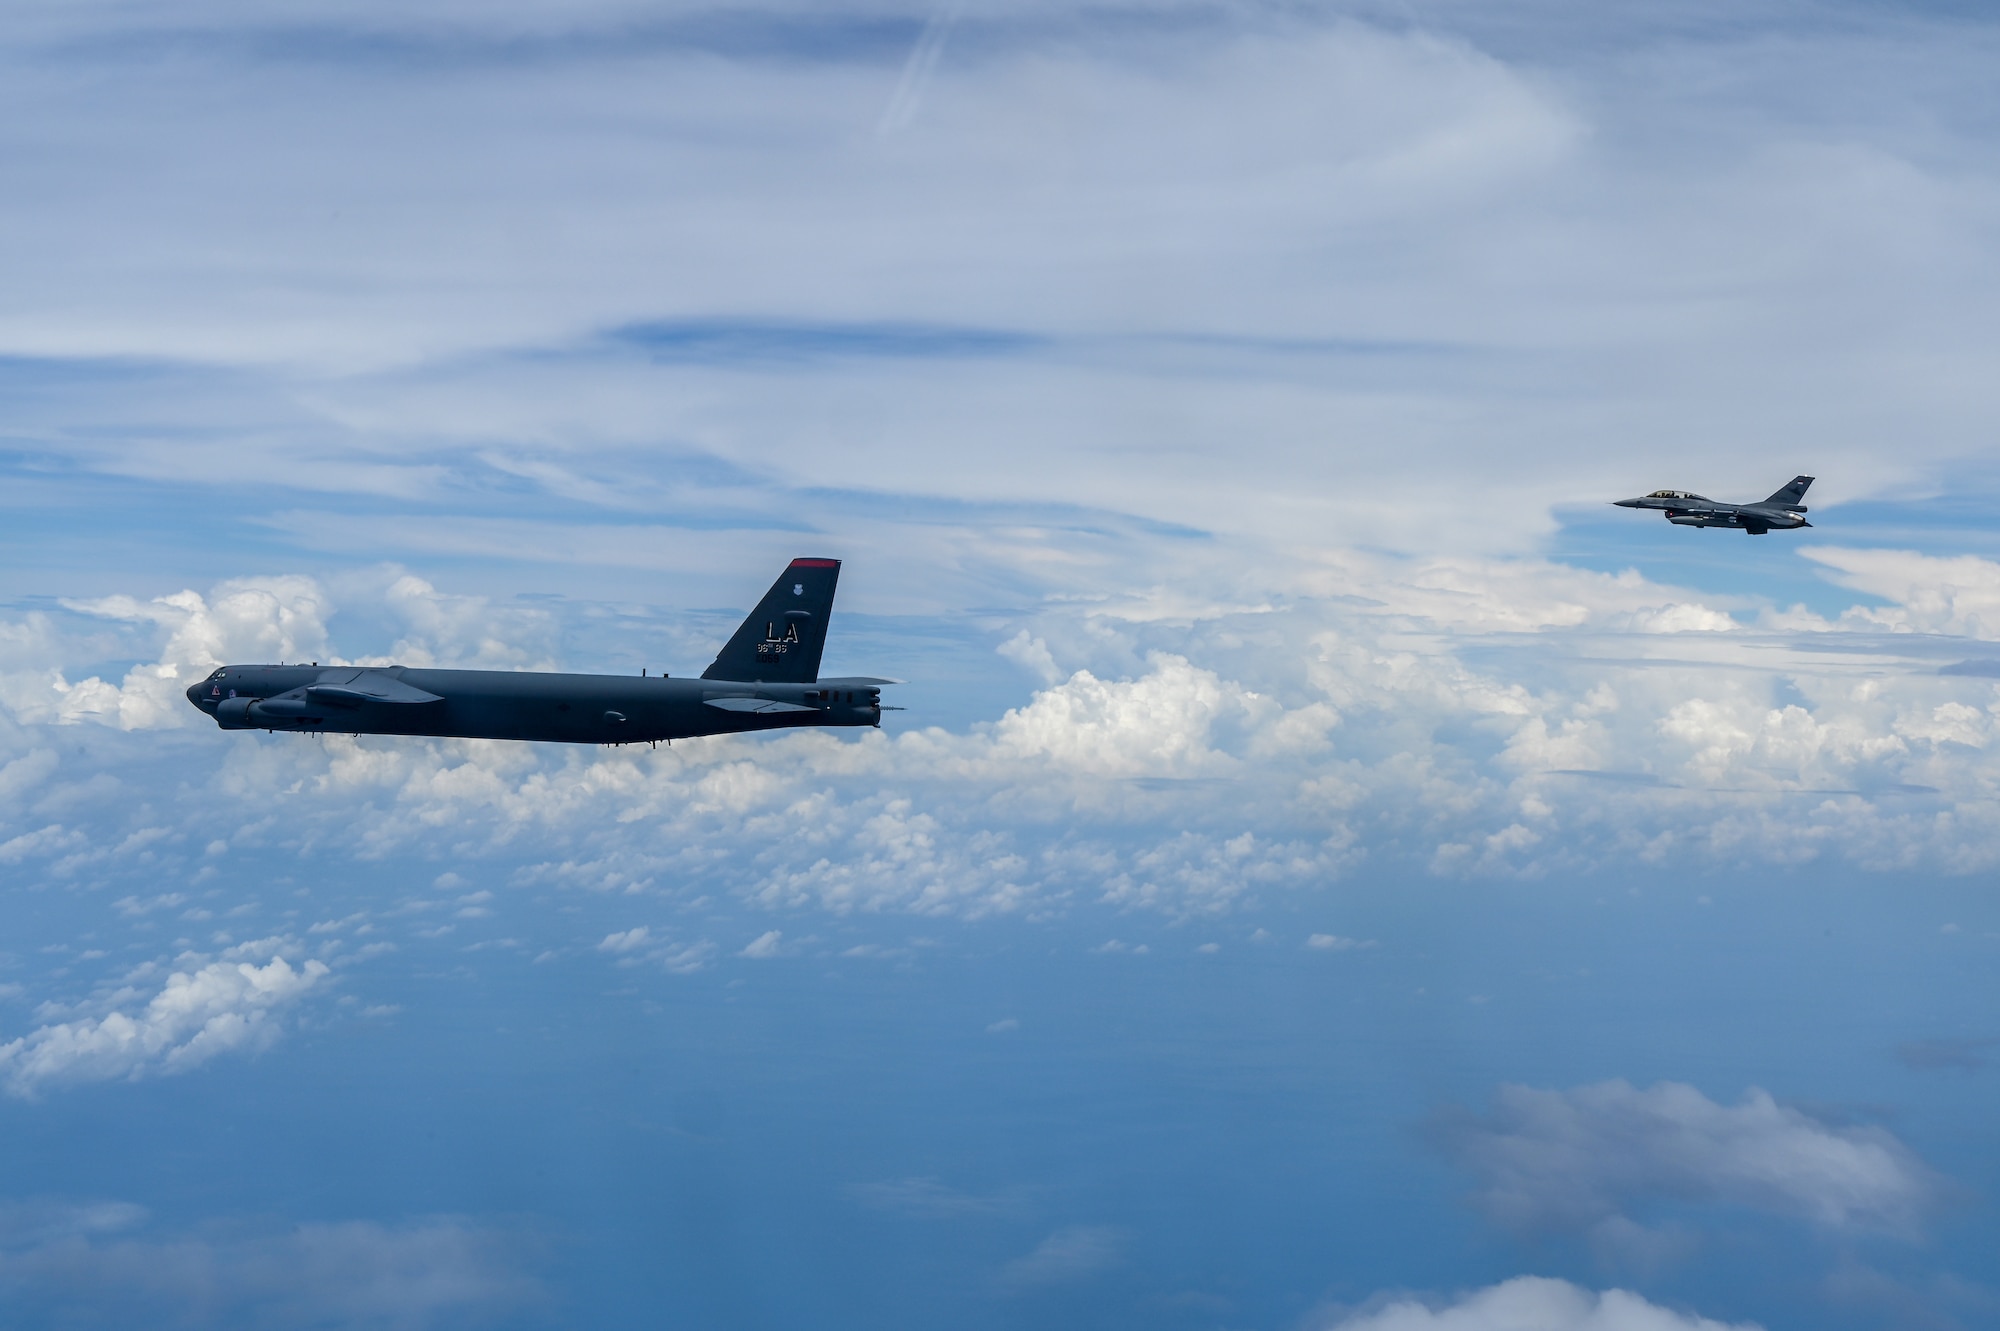 A U.S. Air Force B-52 Stratofortress assigned to the 2nd Bomb Wing, Barksdale Air Force Base, Louisiana, performs aerial operations during a Bomber Task Force deployment in the Indo-Pacific region, Sept. 1, 2021. This is the first time a B-52 has integrated with the Indonesian Air Force during flight. This deployment allows aircrews and support personnel to conduct theater integration and to improve bomber interoperability with allies and partners. (U.S. Air Force photo by Tech. Sgt. Matthew Lotz)